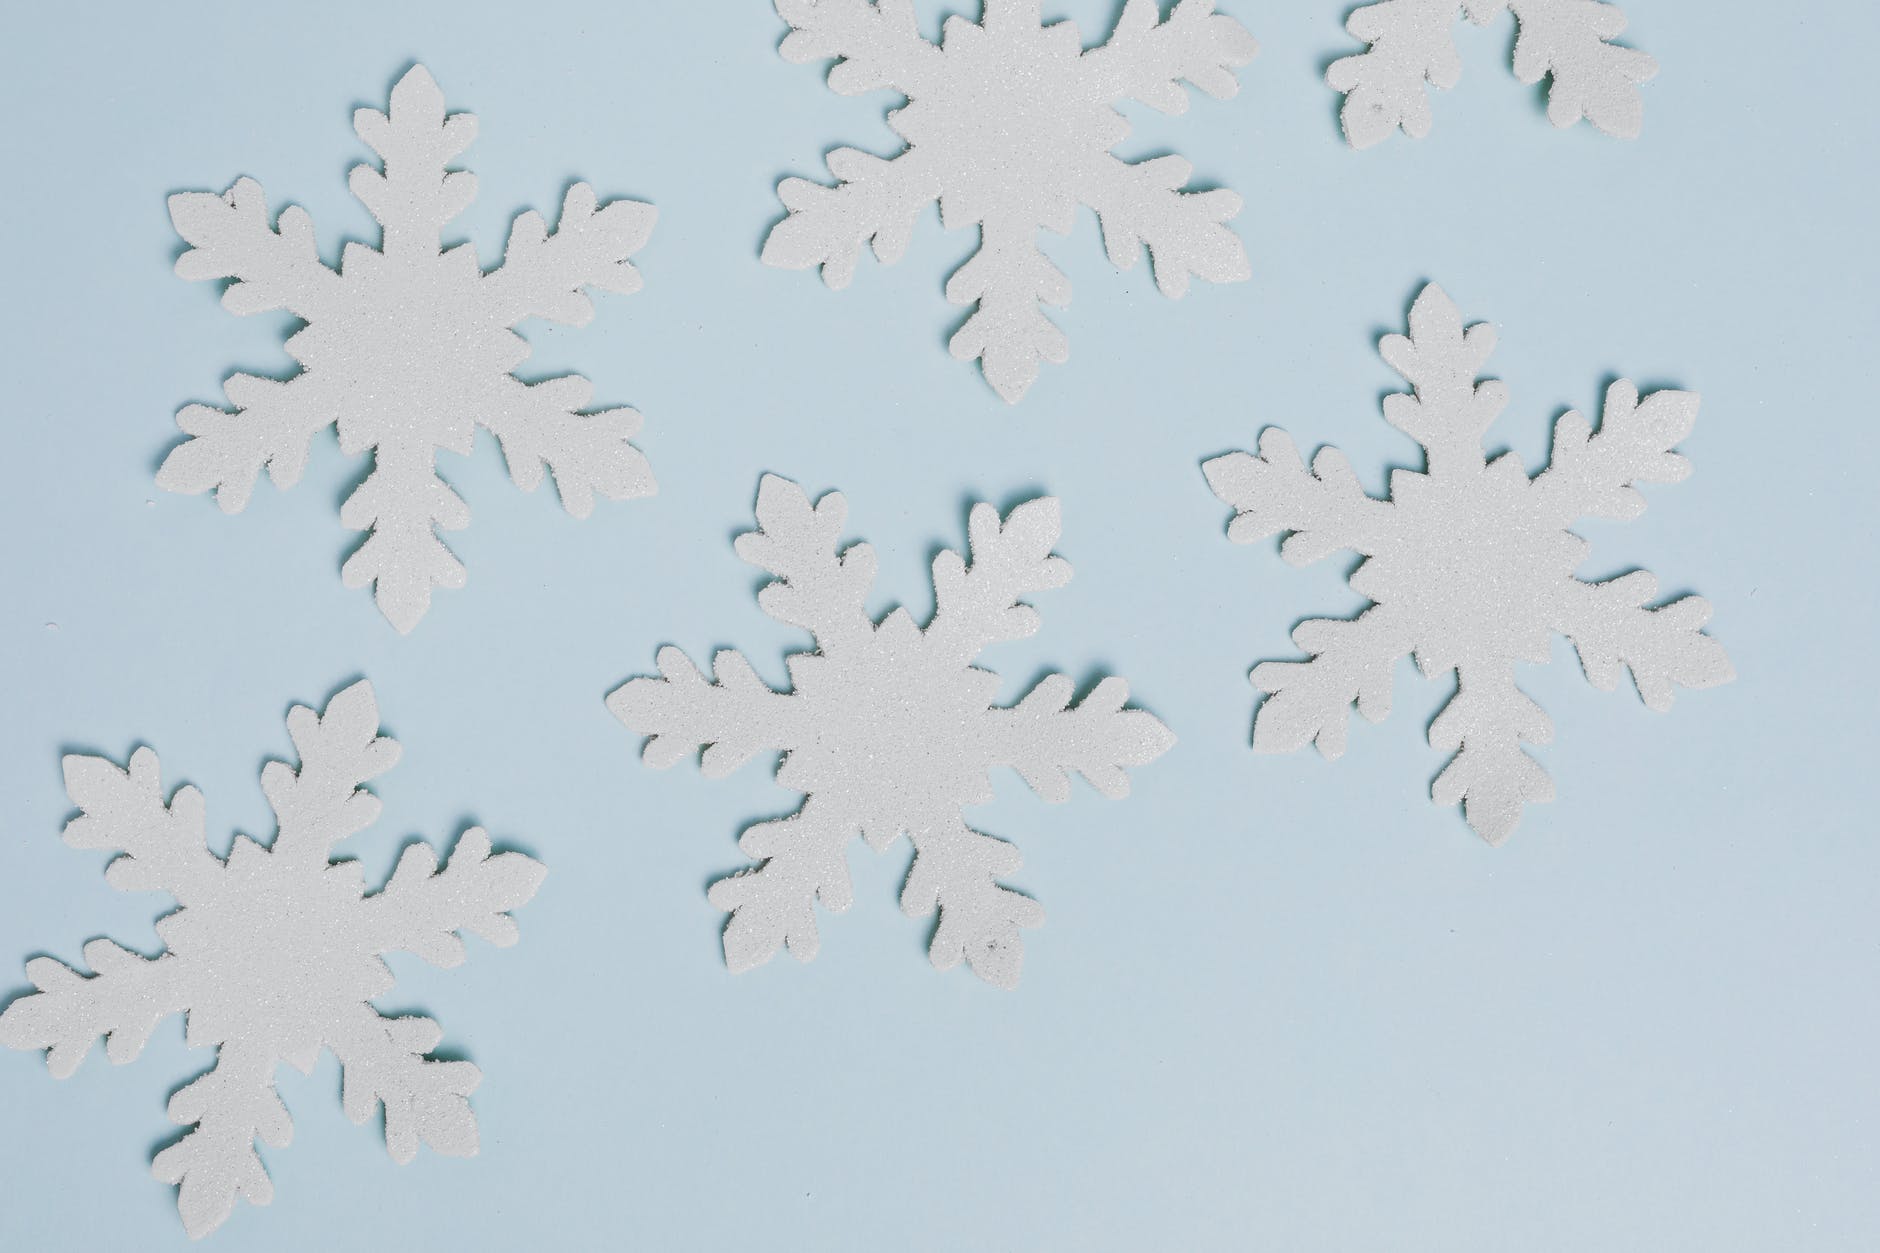 Paper snowflakes on blue background to use an example on Elf family movie night.